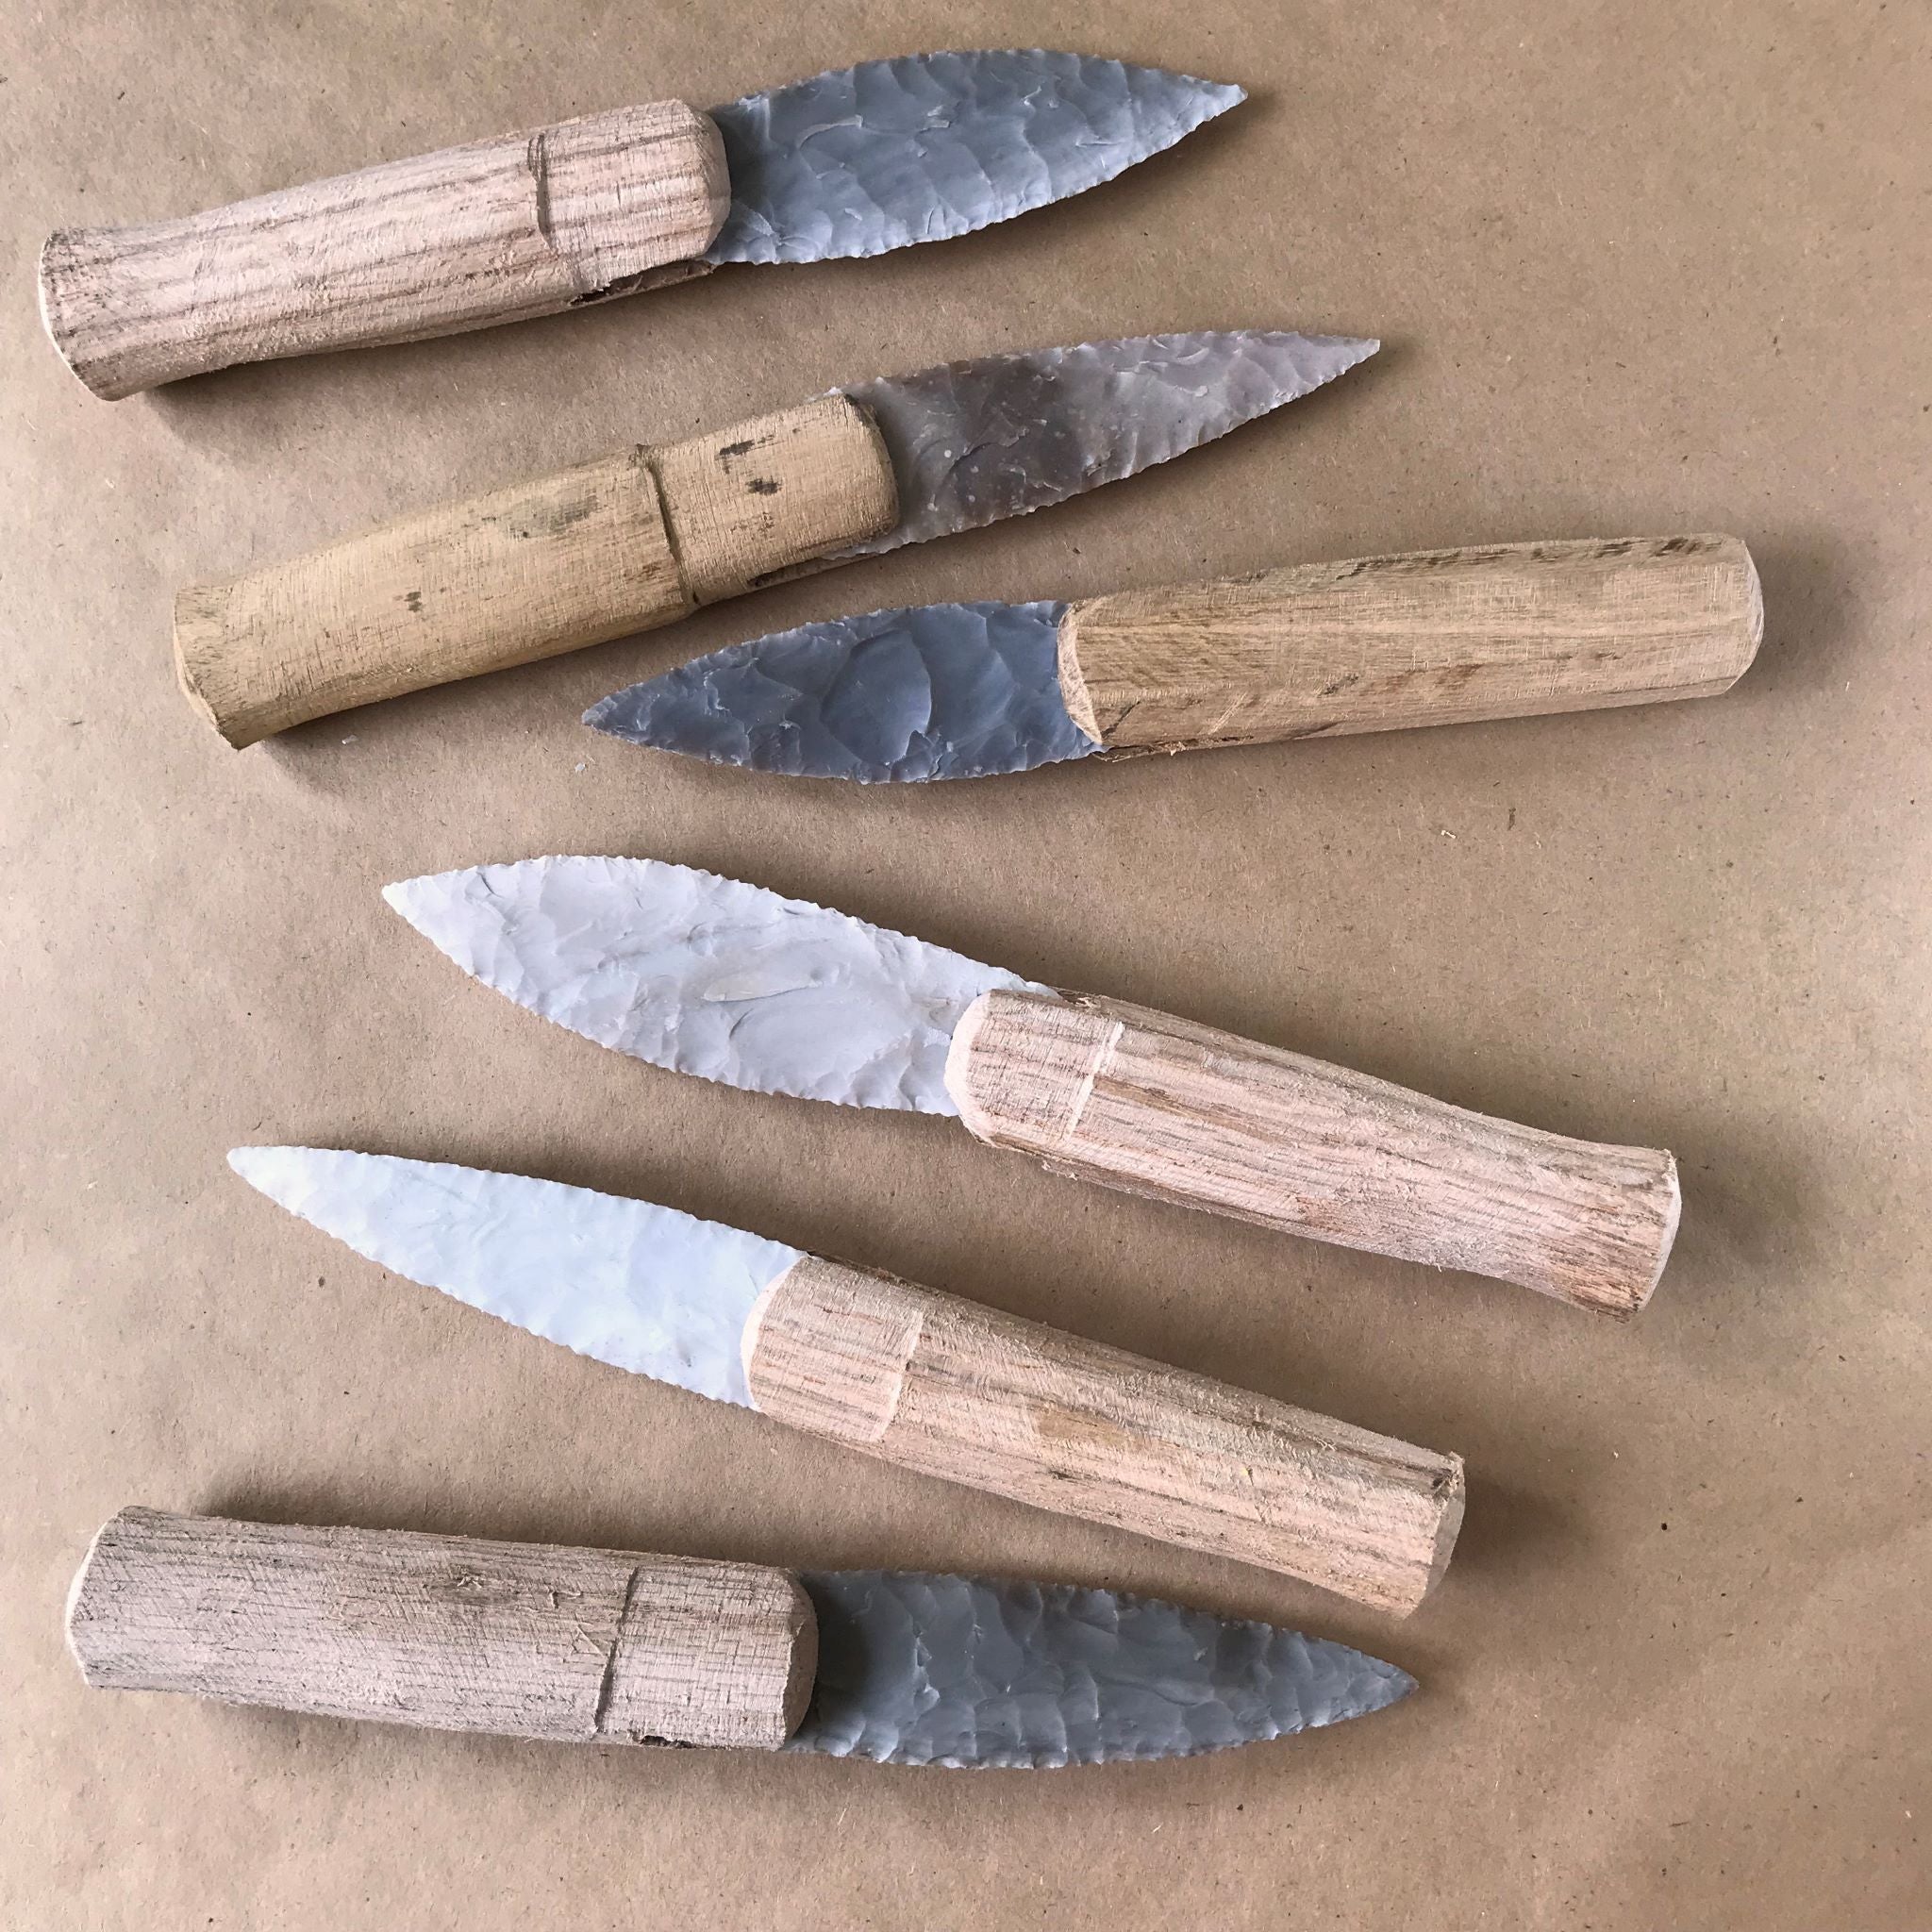 6 examples of Paleo style knife blades with wooden handles